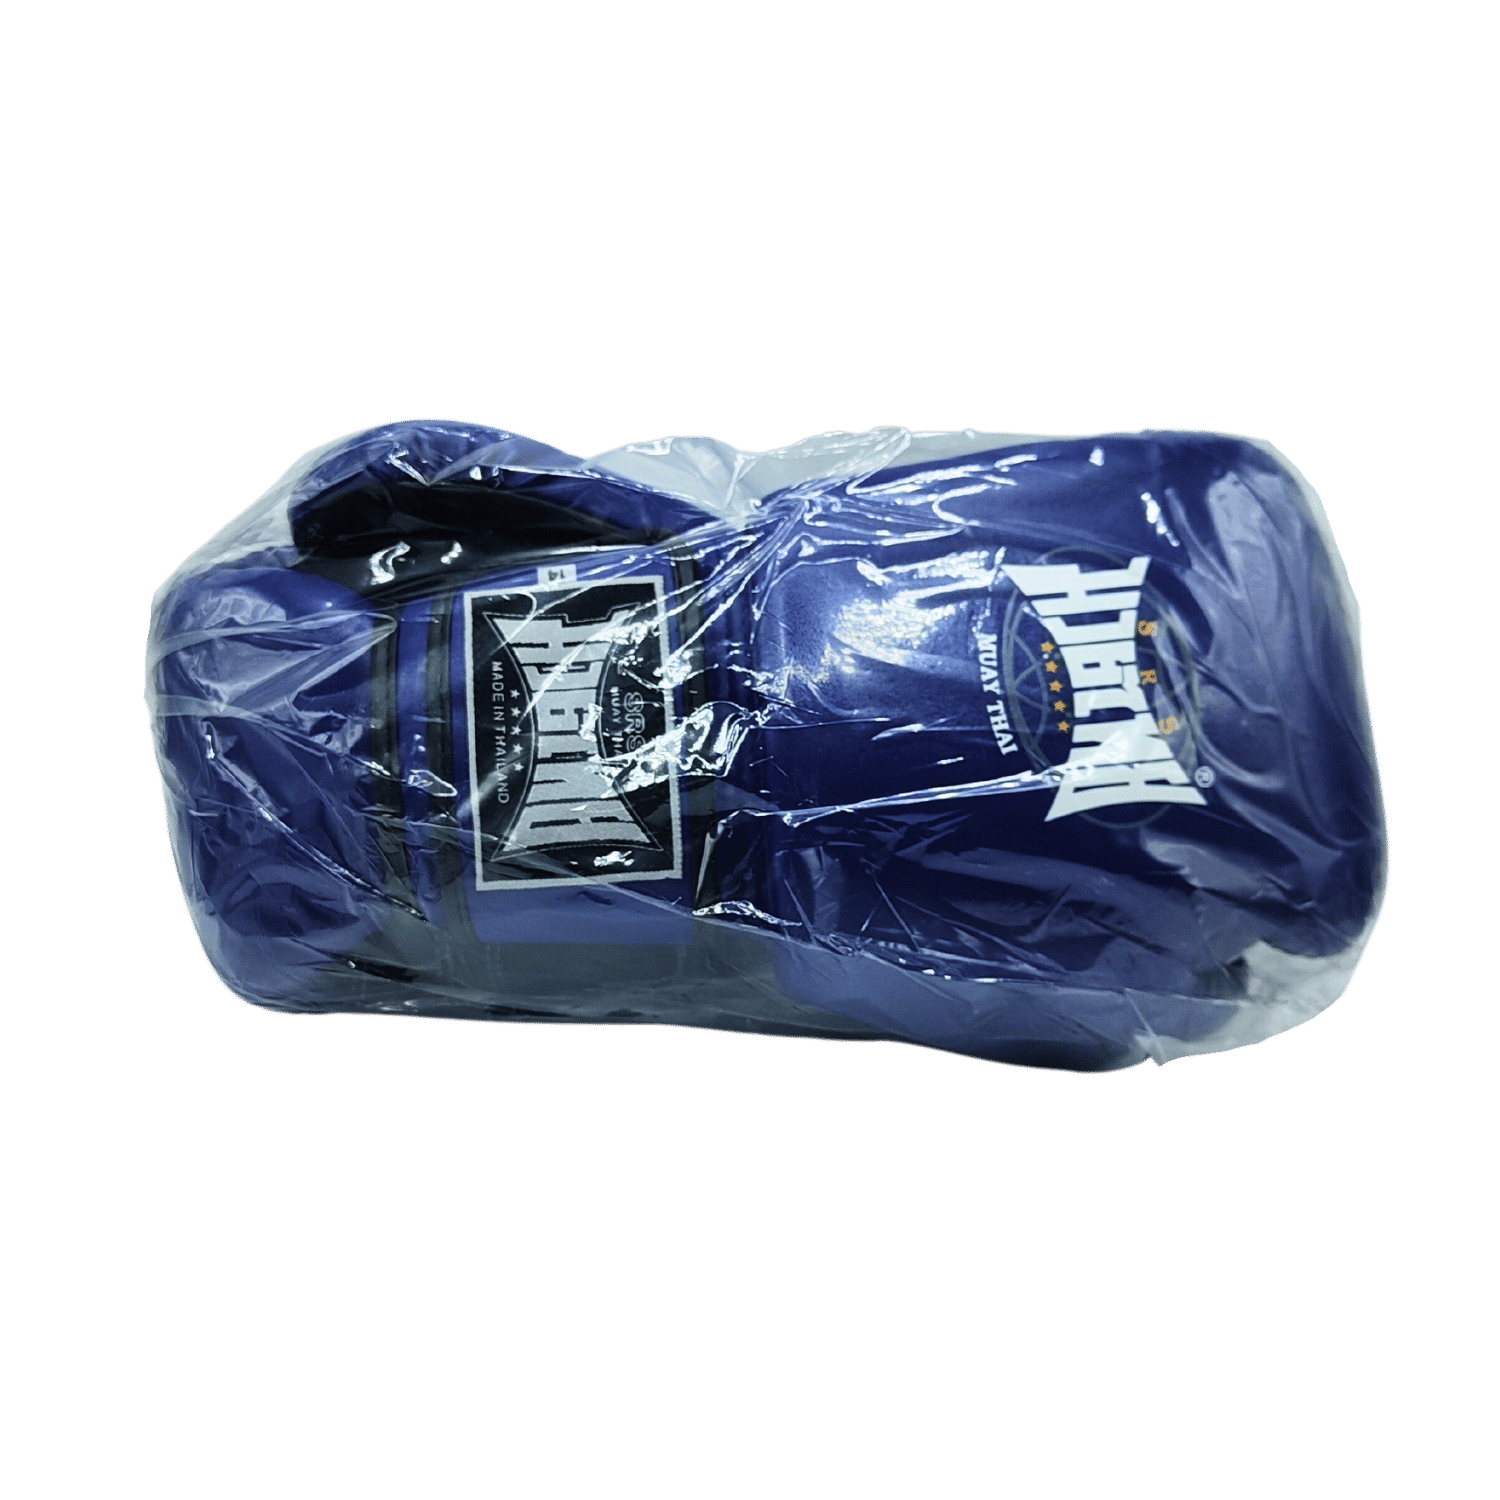 A Muay Thai blue boxing glove in a plastic bag with quality and affordability.